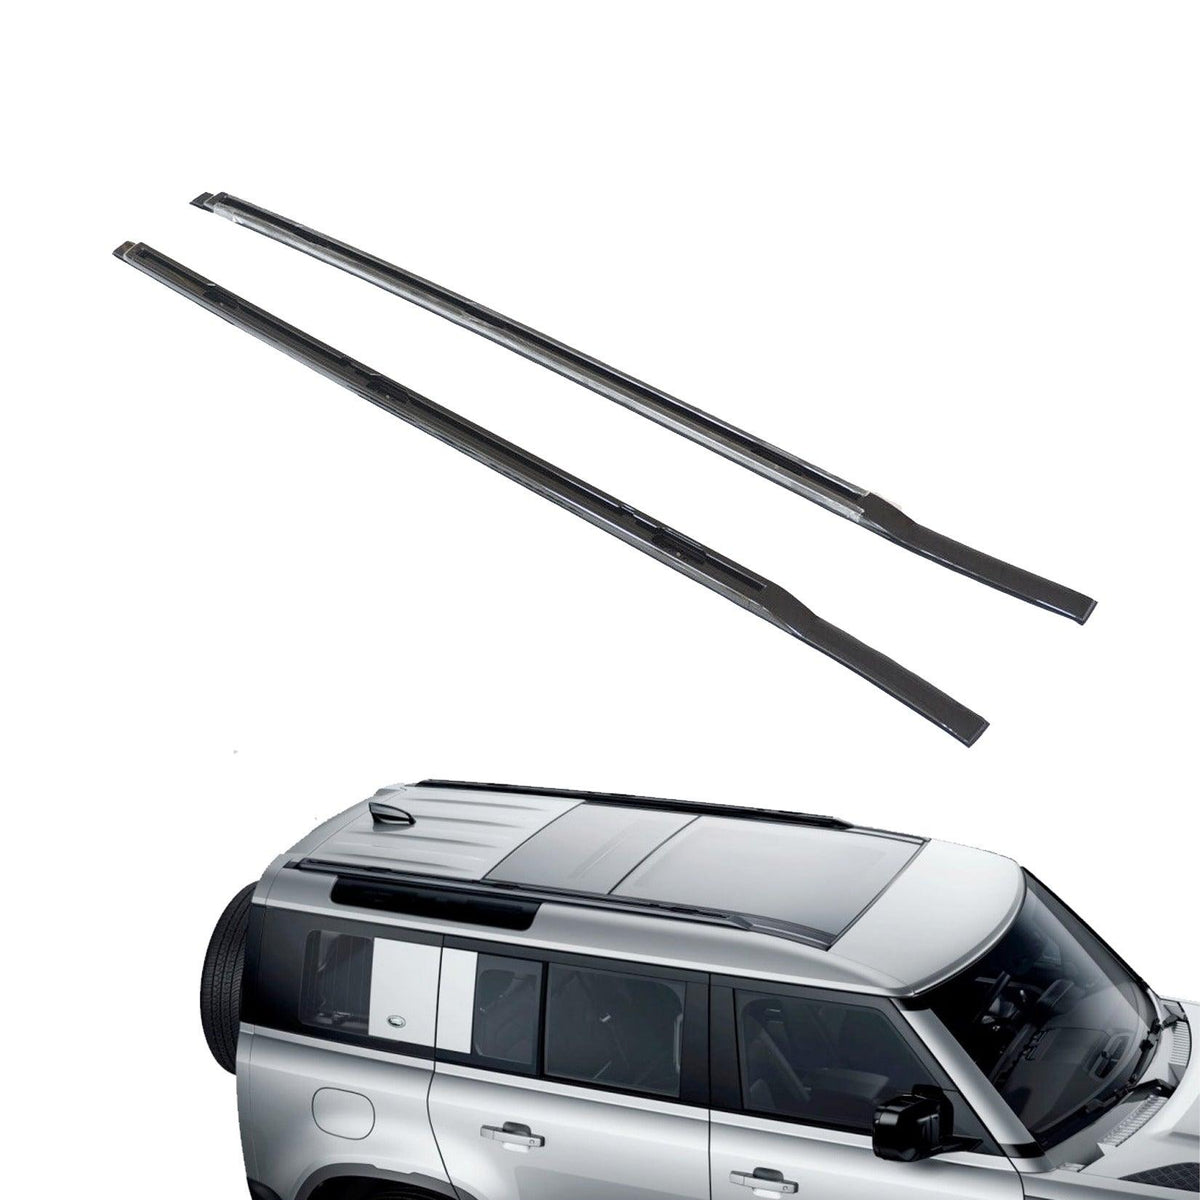 LAND ROVER DEFENDER 110 L663 2020 ON OE STYLE ROOF RAIL - PAIR - IN BLACK - Storm Xccessories2